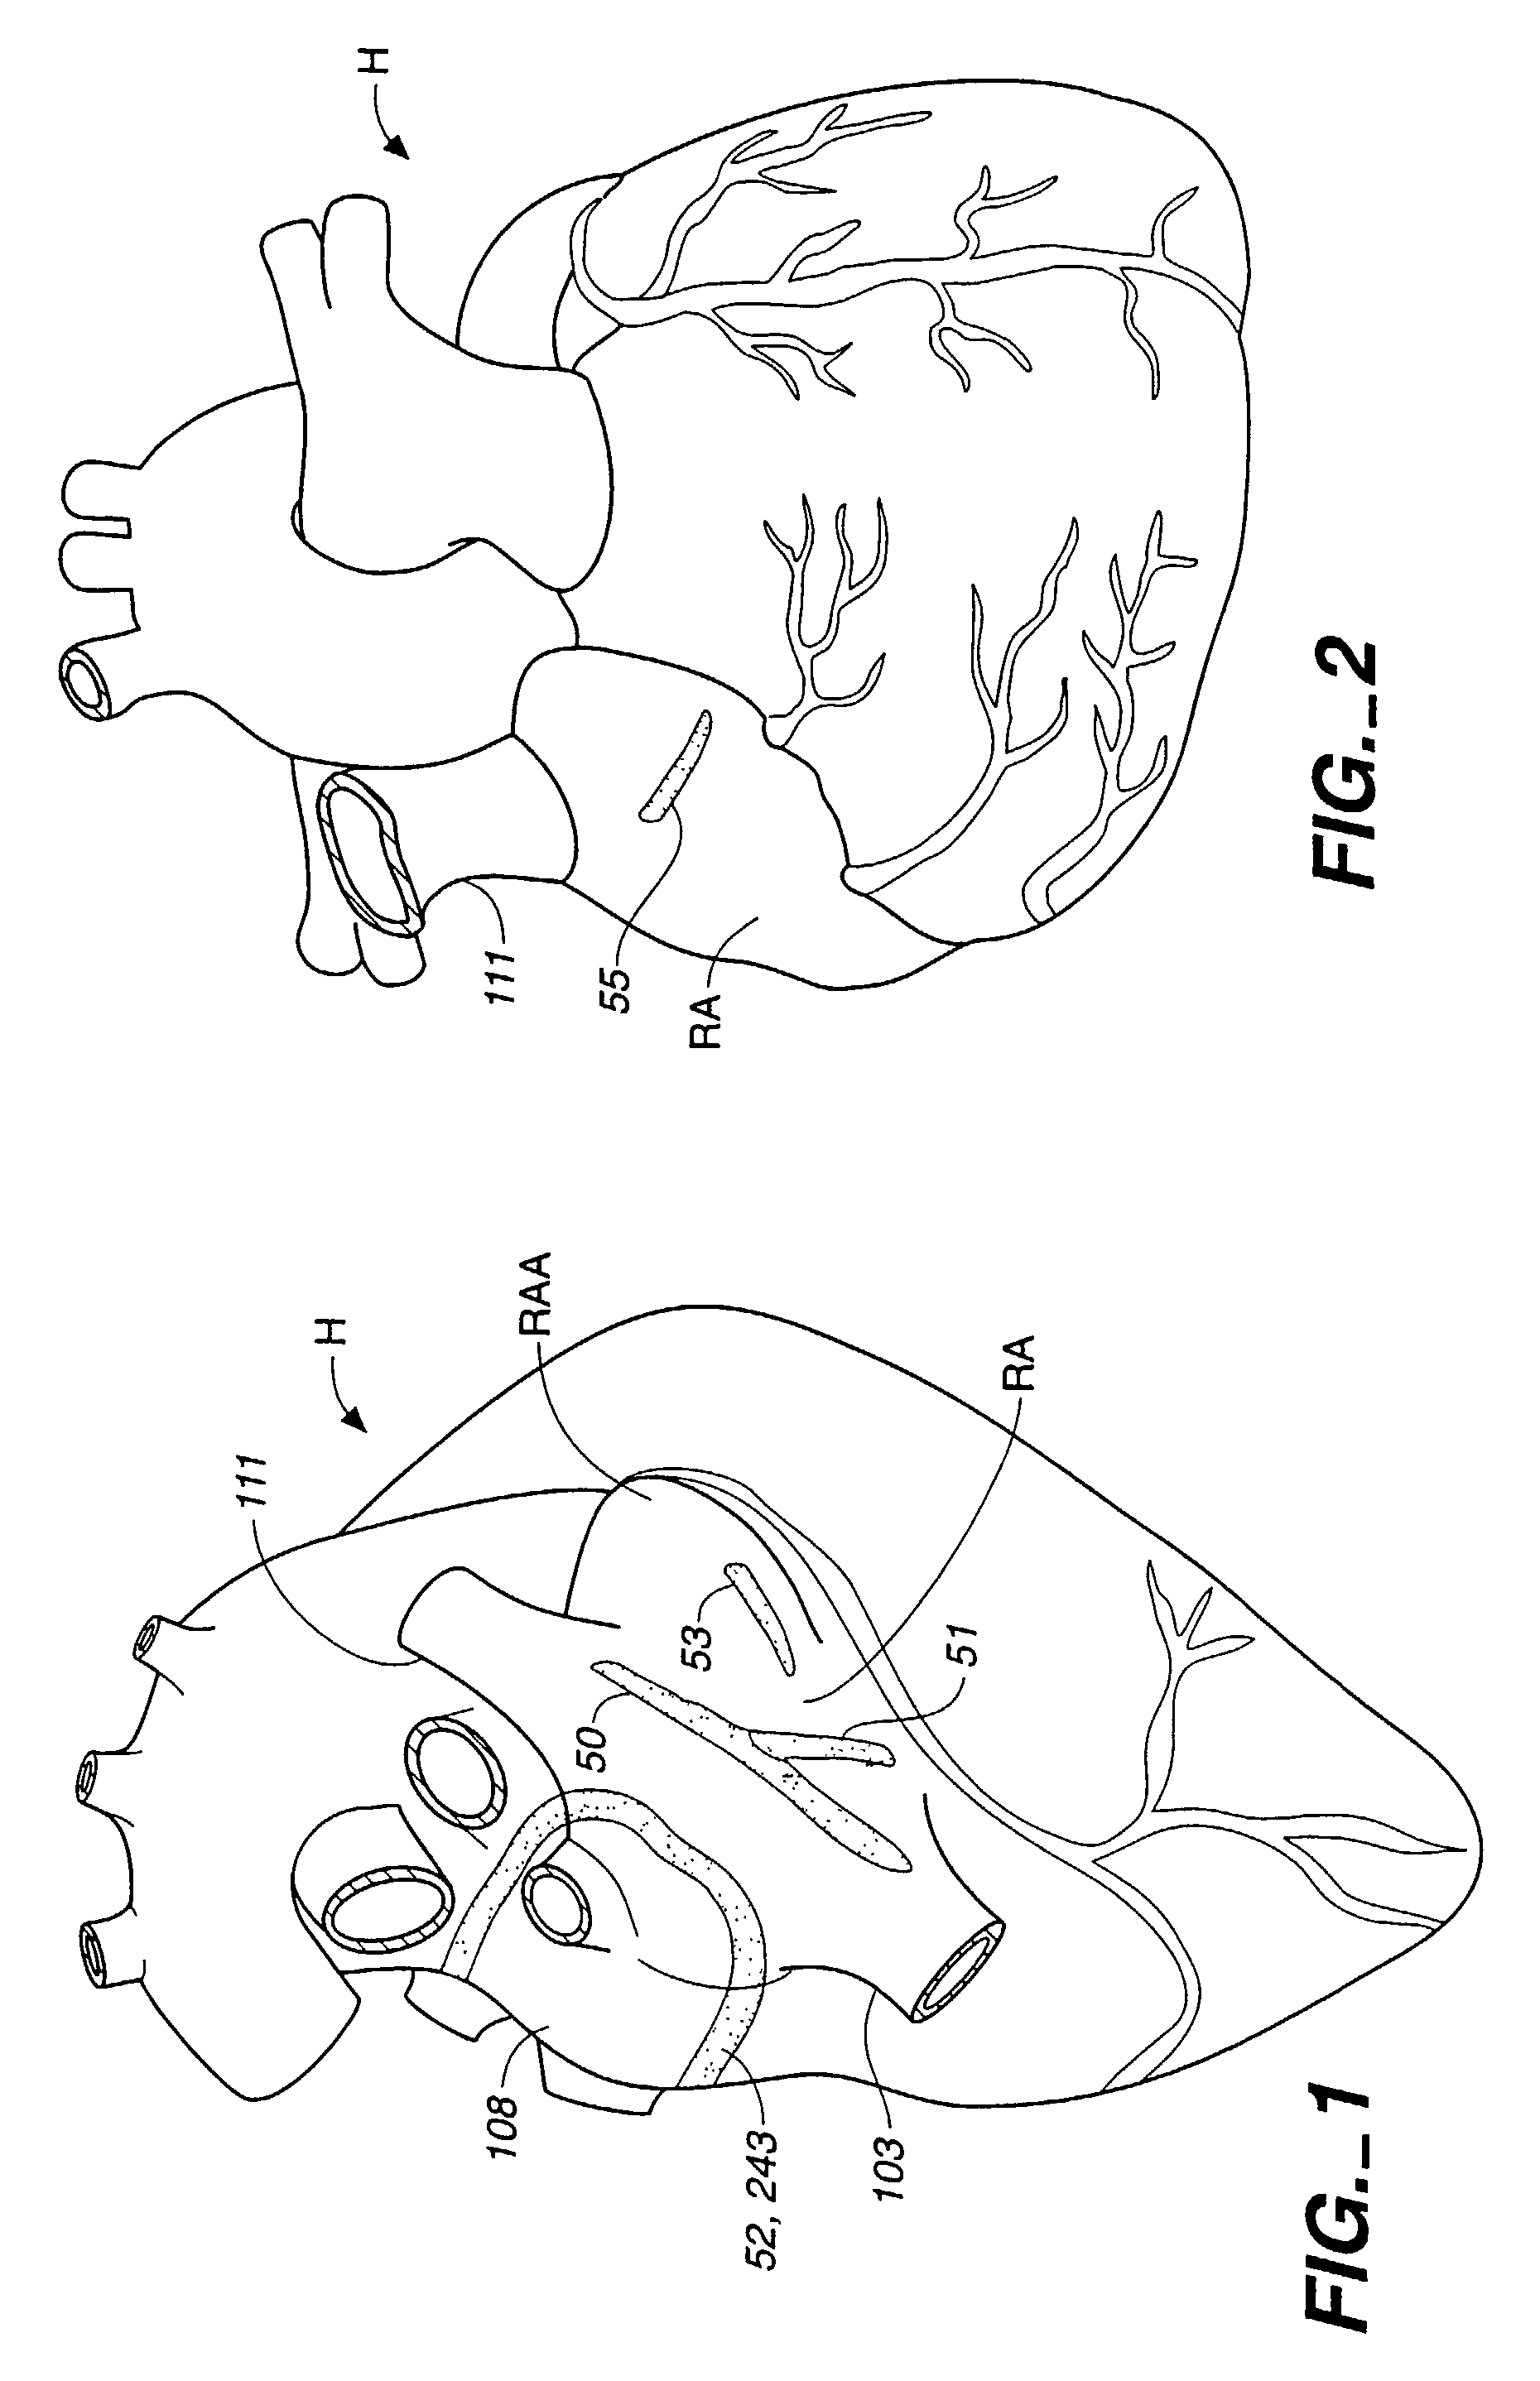 Surgical system and procedure for treatment of medically refractory atrial fibrillation